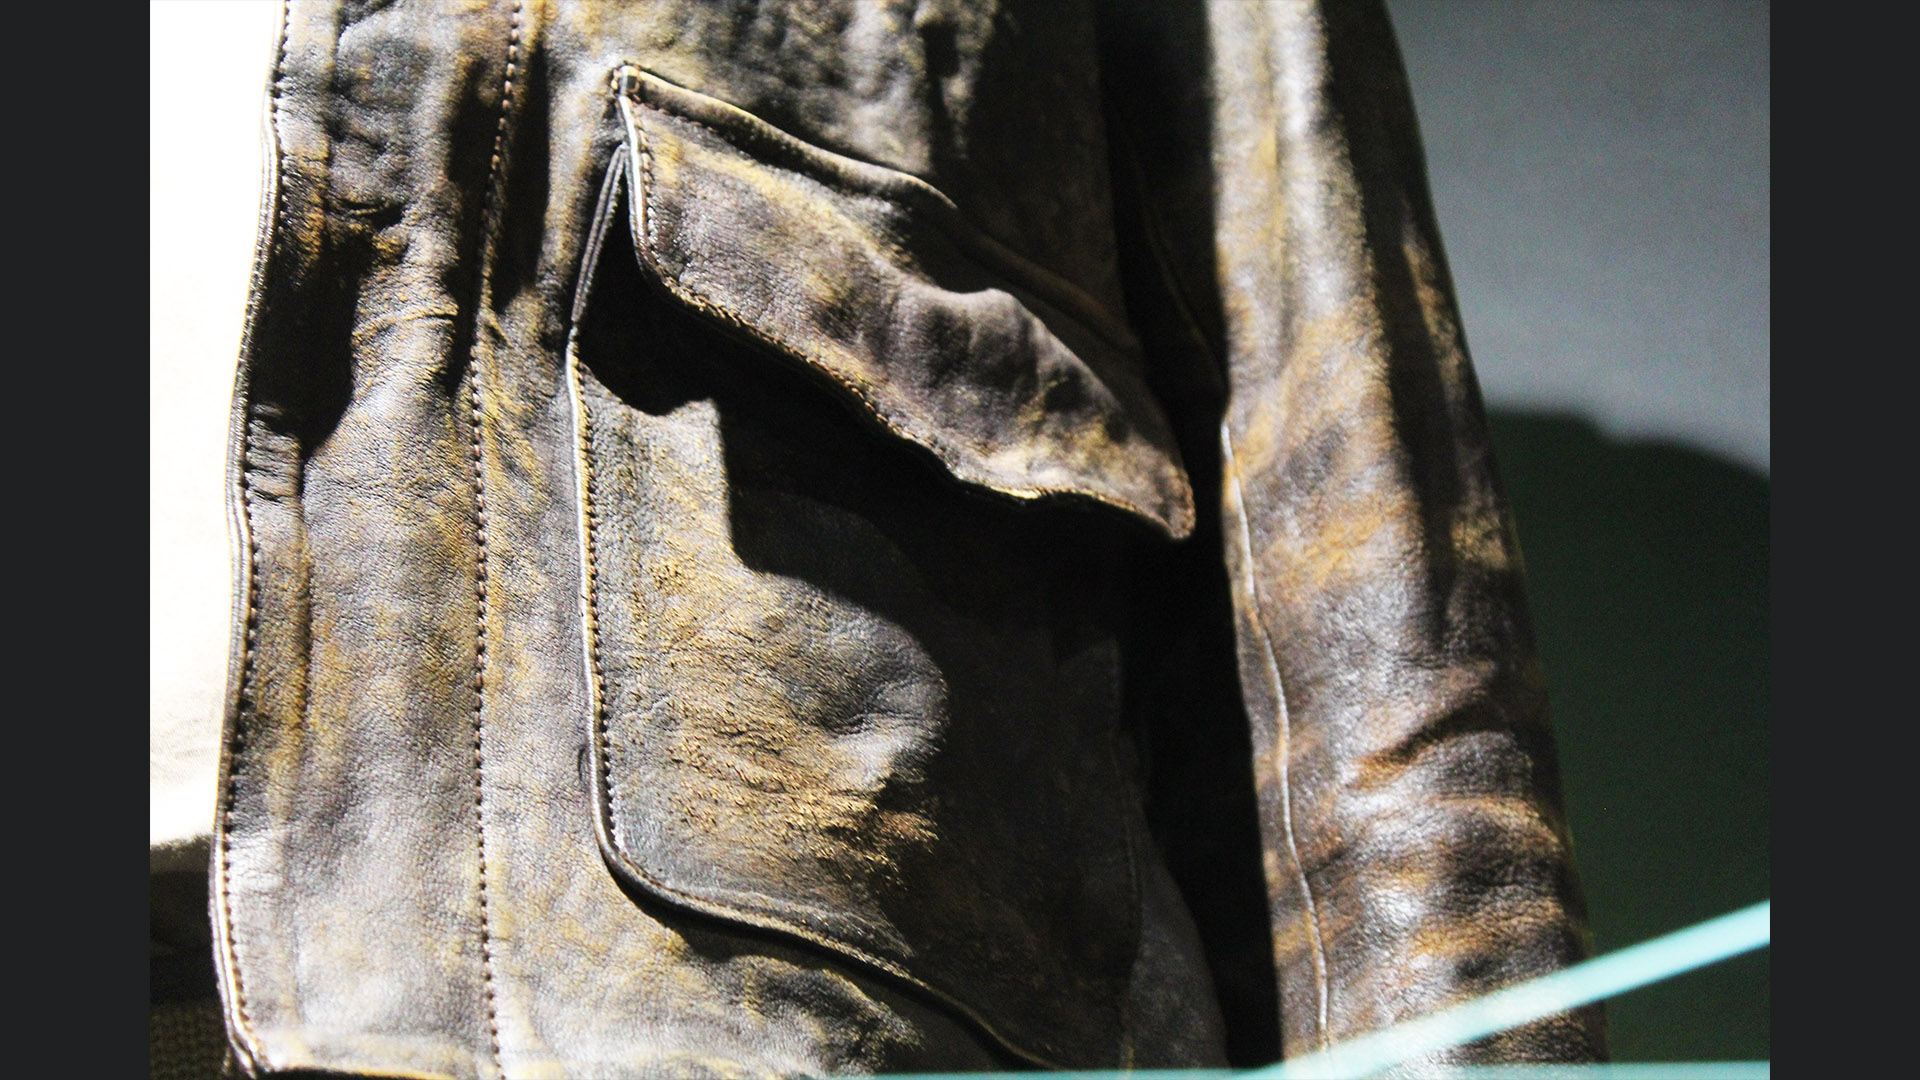 Original jacket costume from Indiana Jones and the Dial of Destiny.